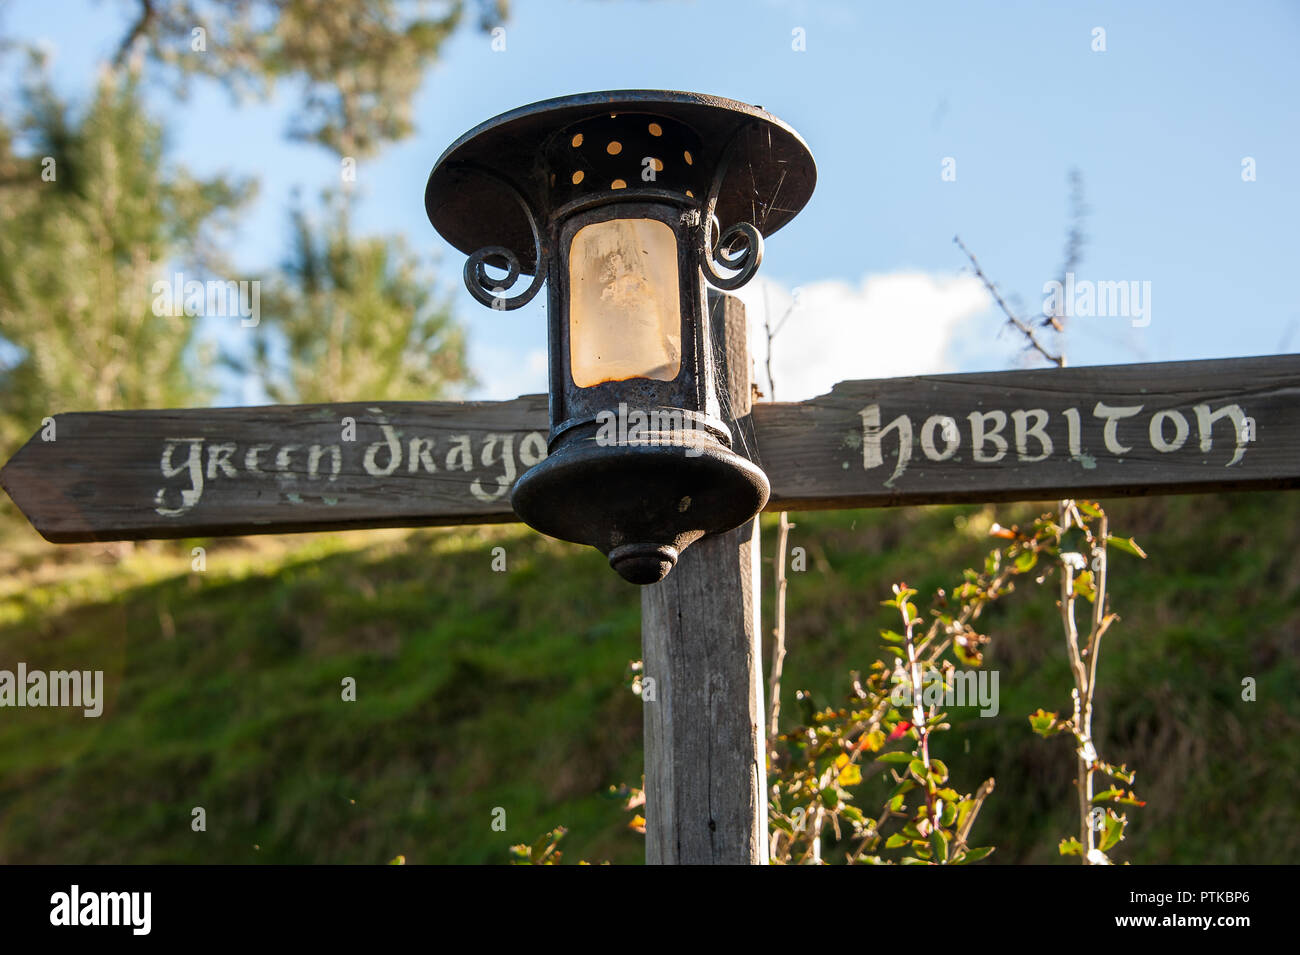 Matamata, New Zealand: Hobbiton movie set created to film Lord of the Rings and The Hobbit. Signpost and lantern marks a route. Stock Photo